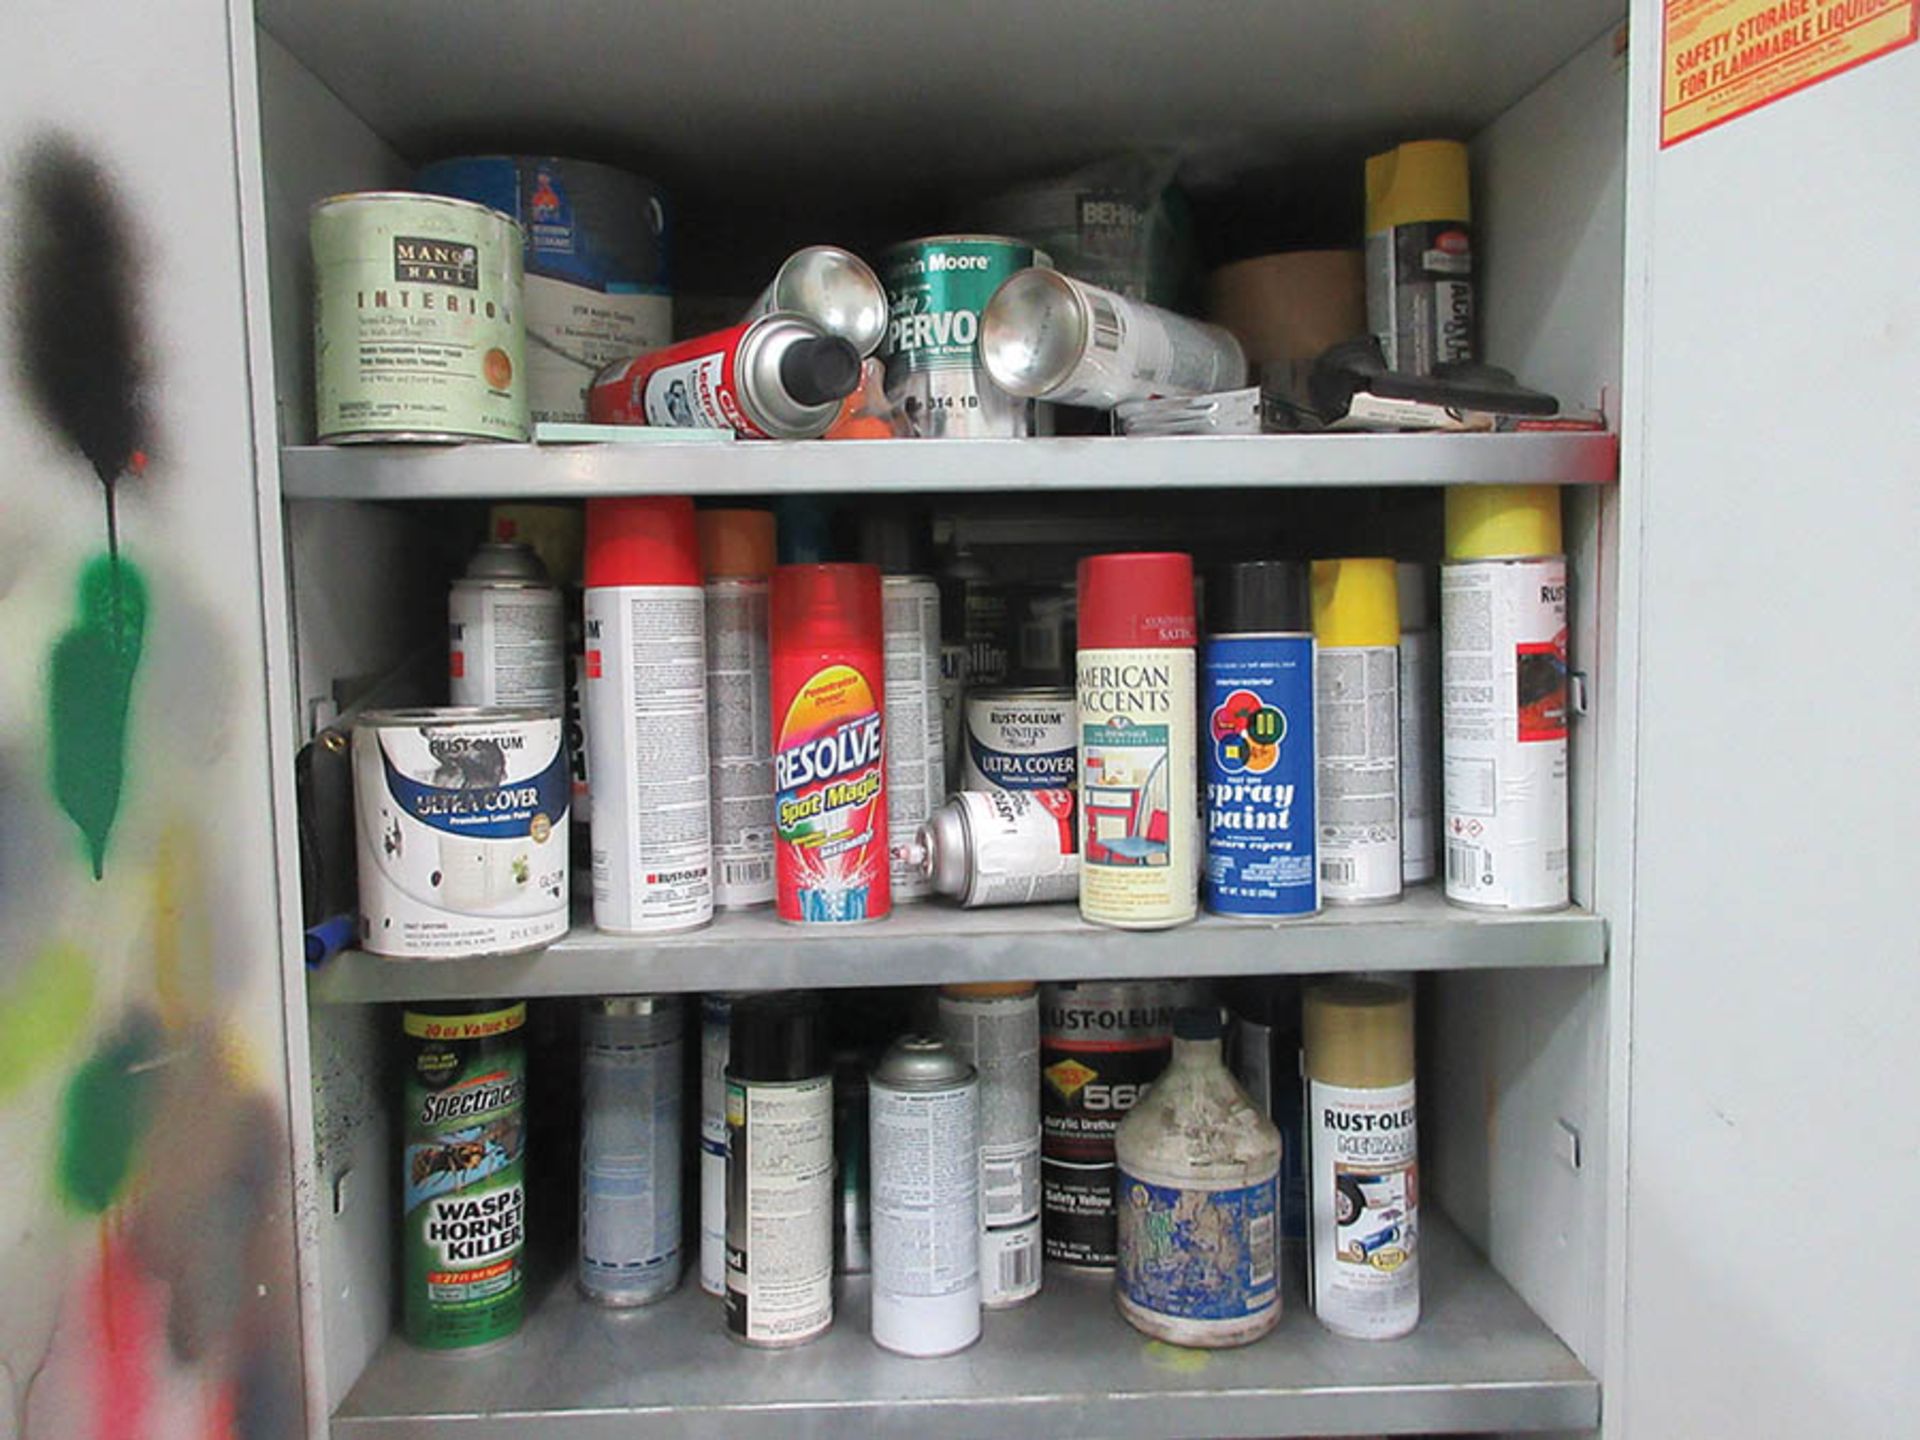 SECURALL FLAMMABLE LIQUID STORAGE CABINET, W/ CONTENT - Image 2 of 3